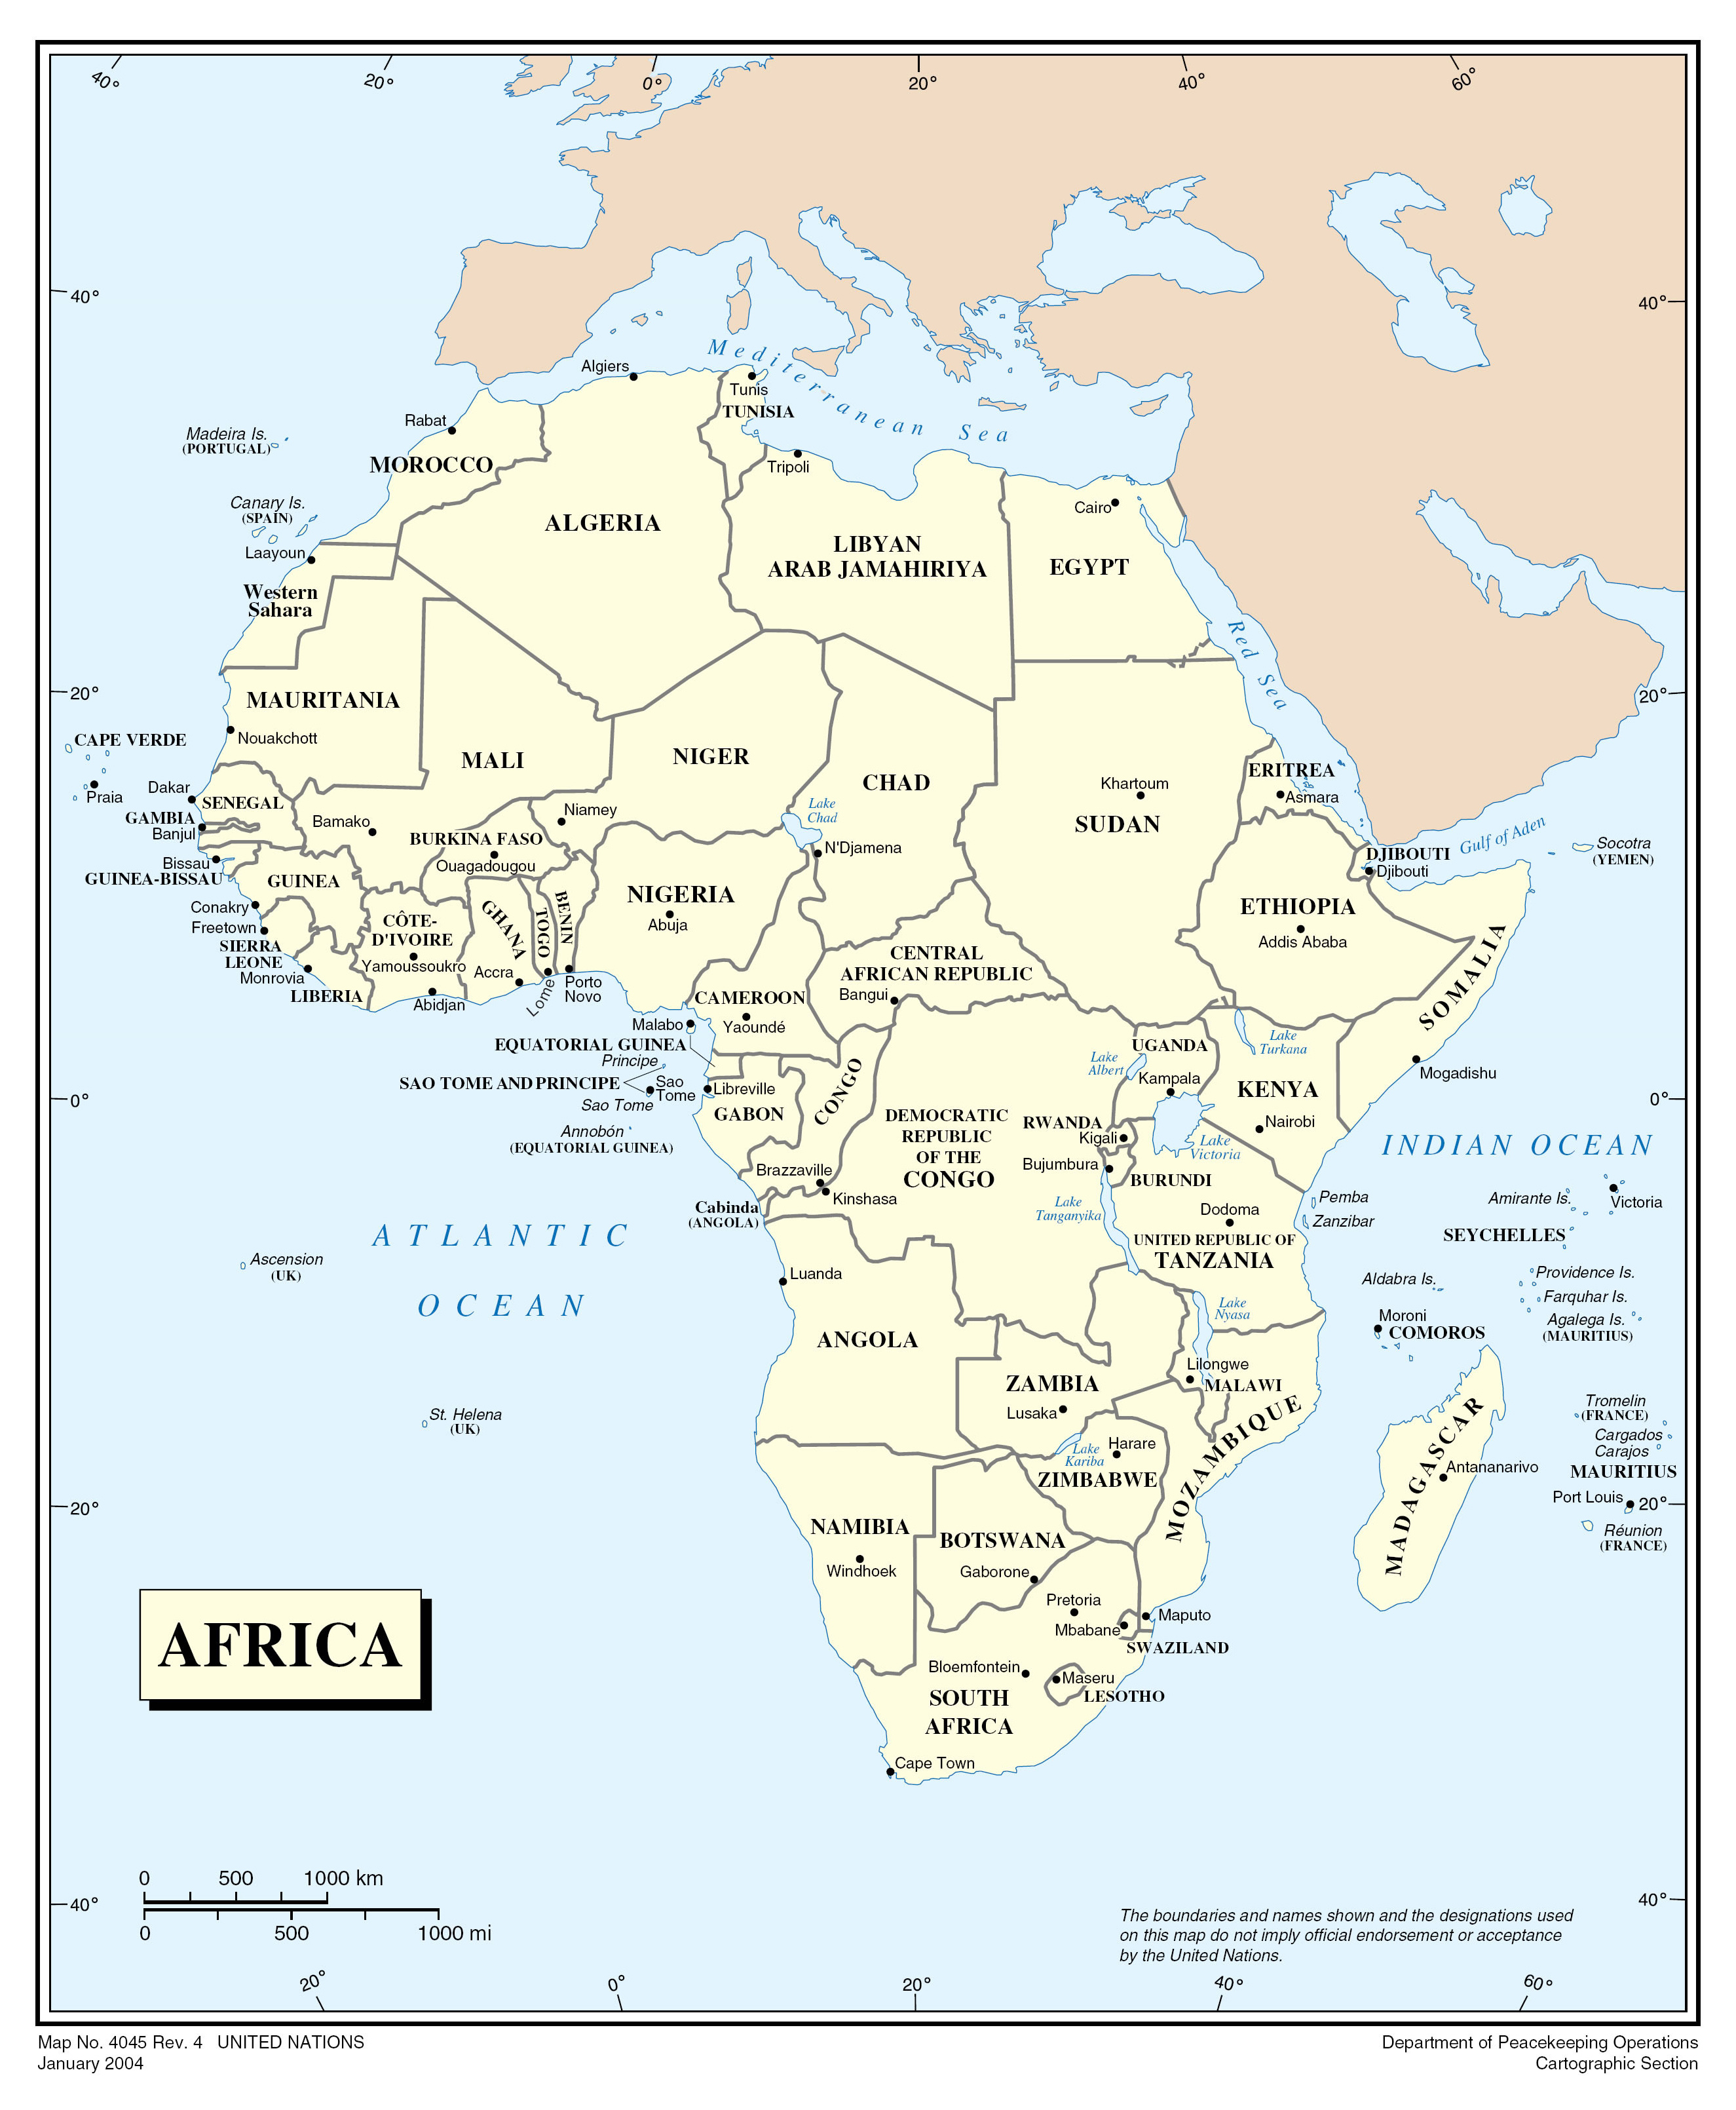 maps-of-africa-and-african-countries-political-maps-administrative